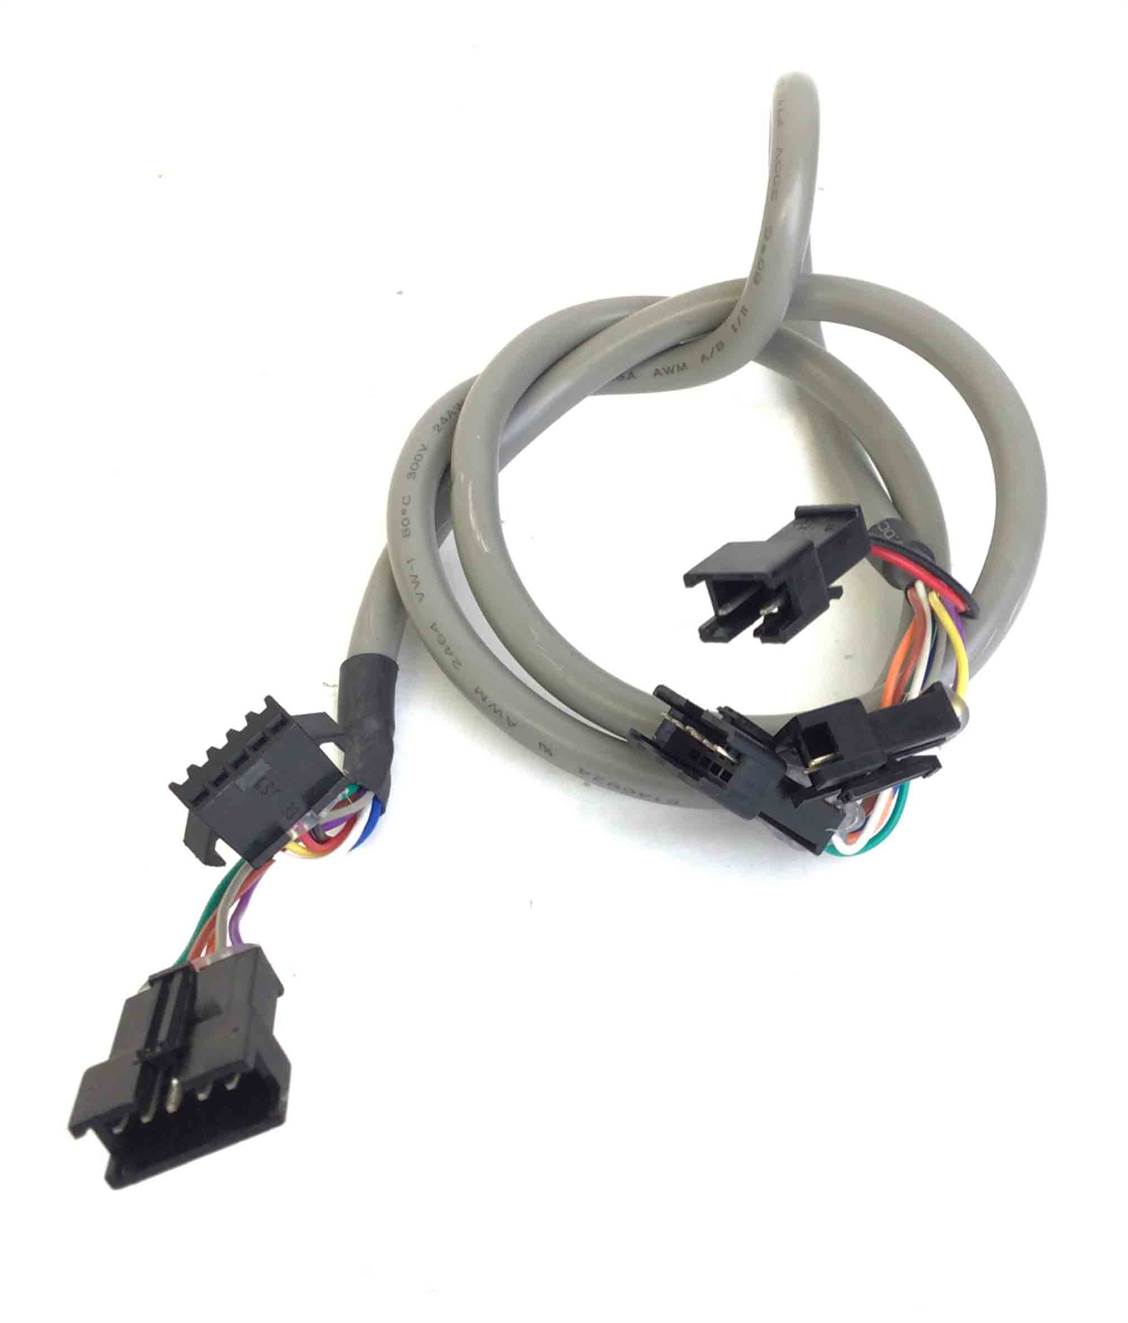 Sensor Wire Harness Interconnect Pulse HR Heart Rate (Used)